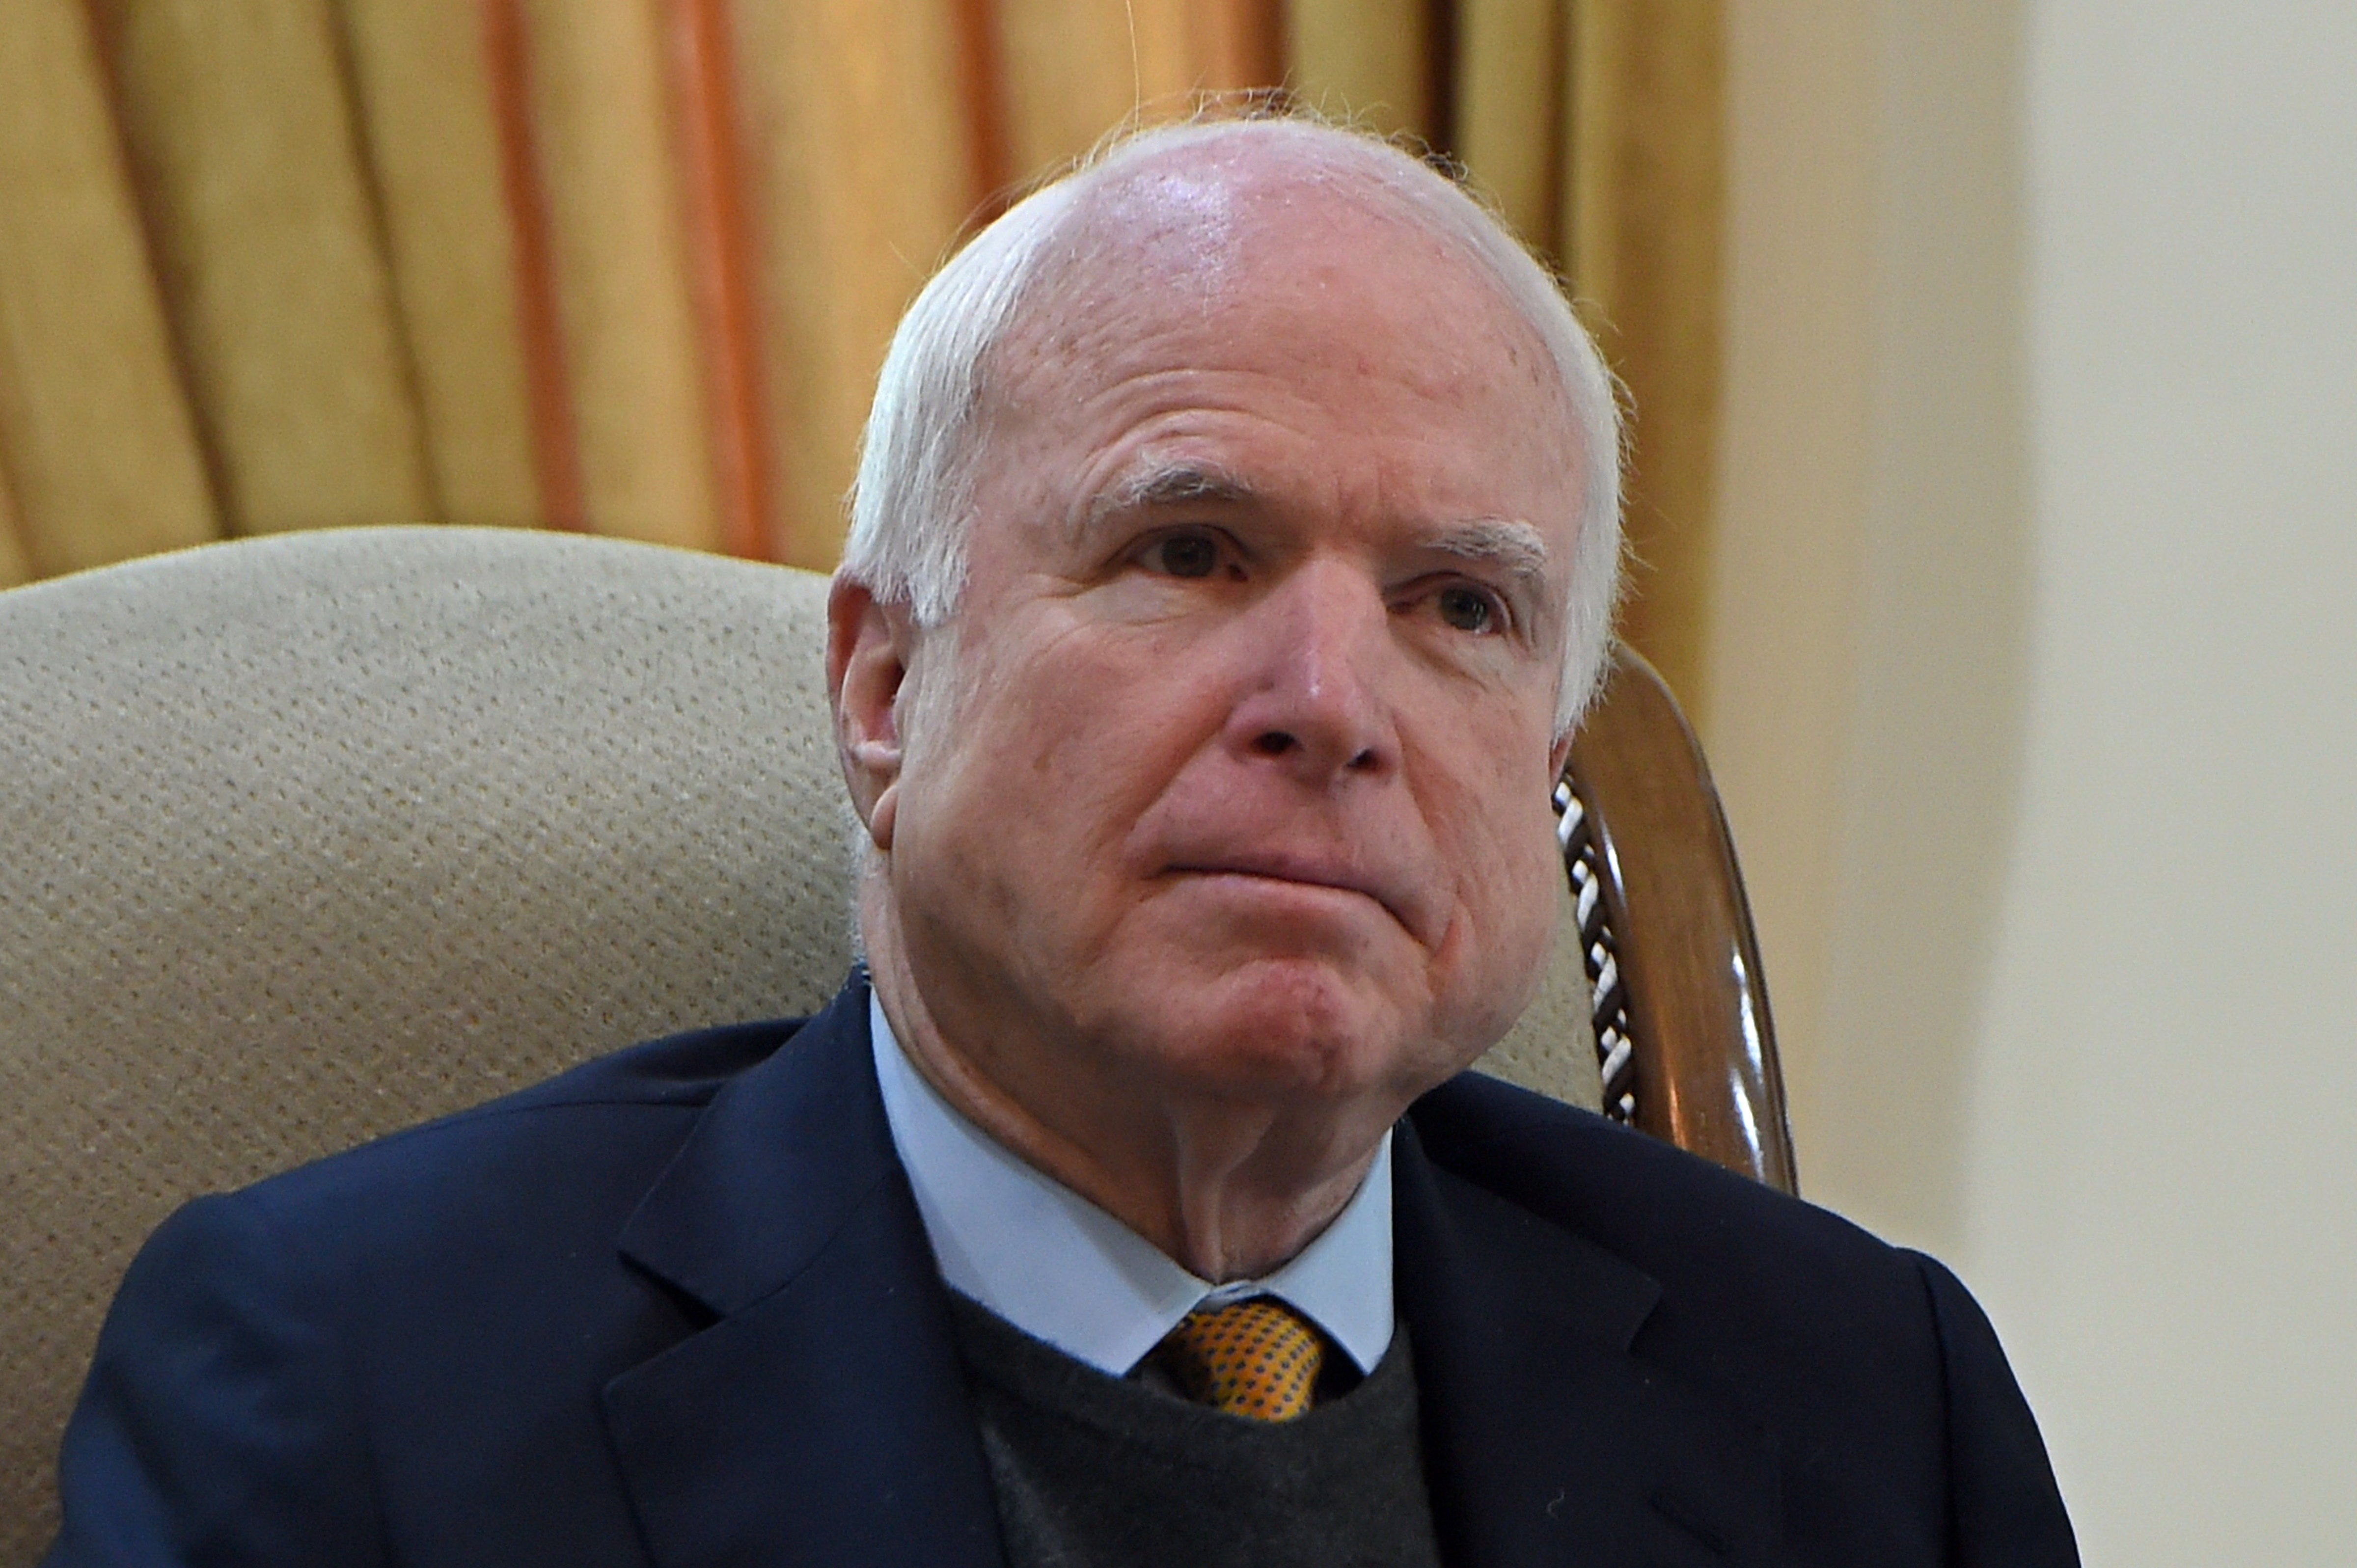 U.S. Senator John McCain looks on during a meeting with Afghan Chief Executive Officer Abdullah Abdullah in Kabul on Dec. 25, 2014 (Wakil Kohsar—AFP/Getty Images)